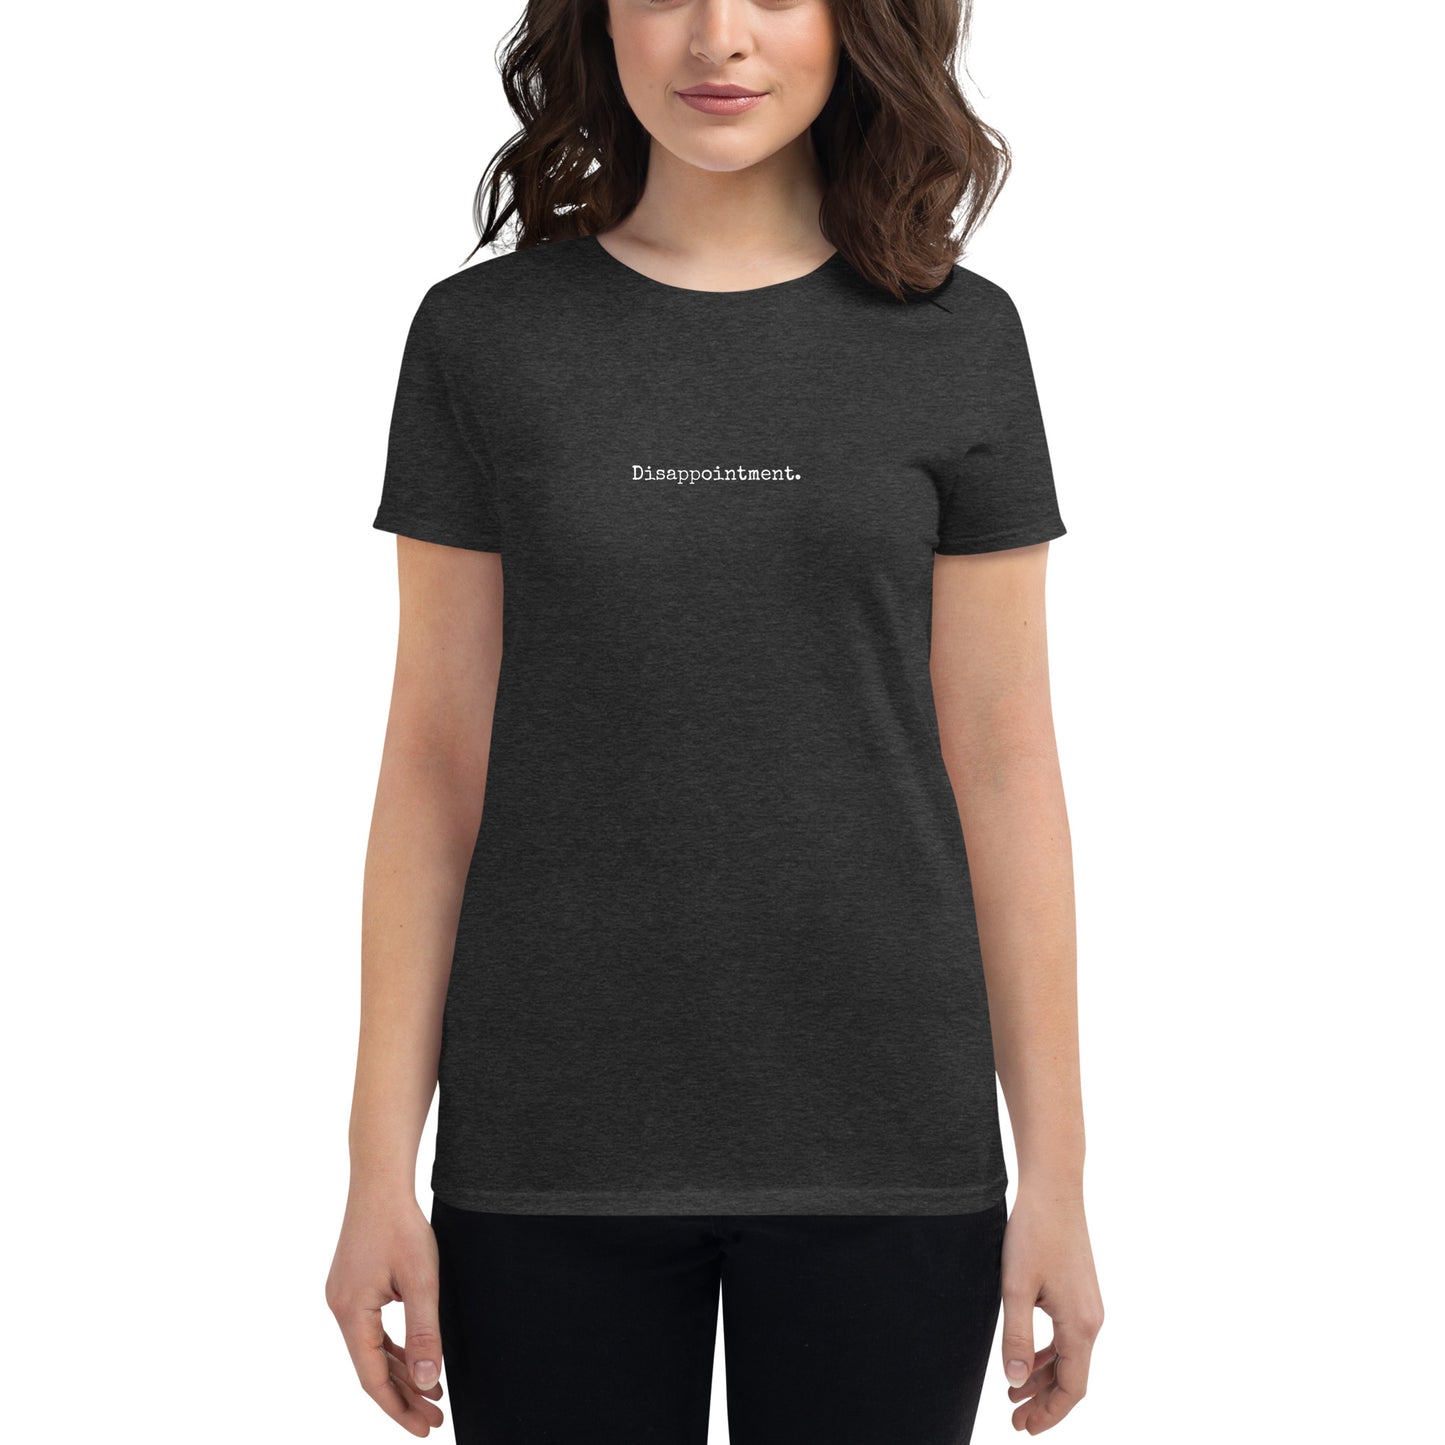 Disappointment - Women's short sleeve t-shirt